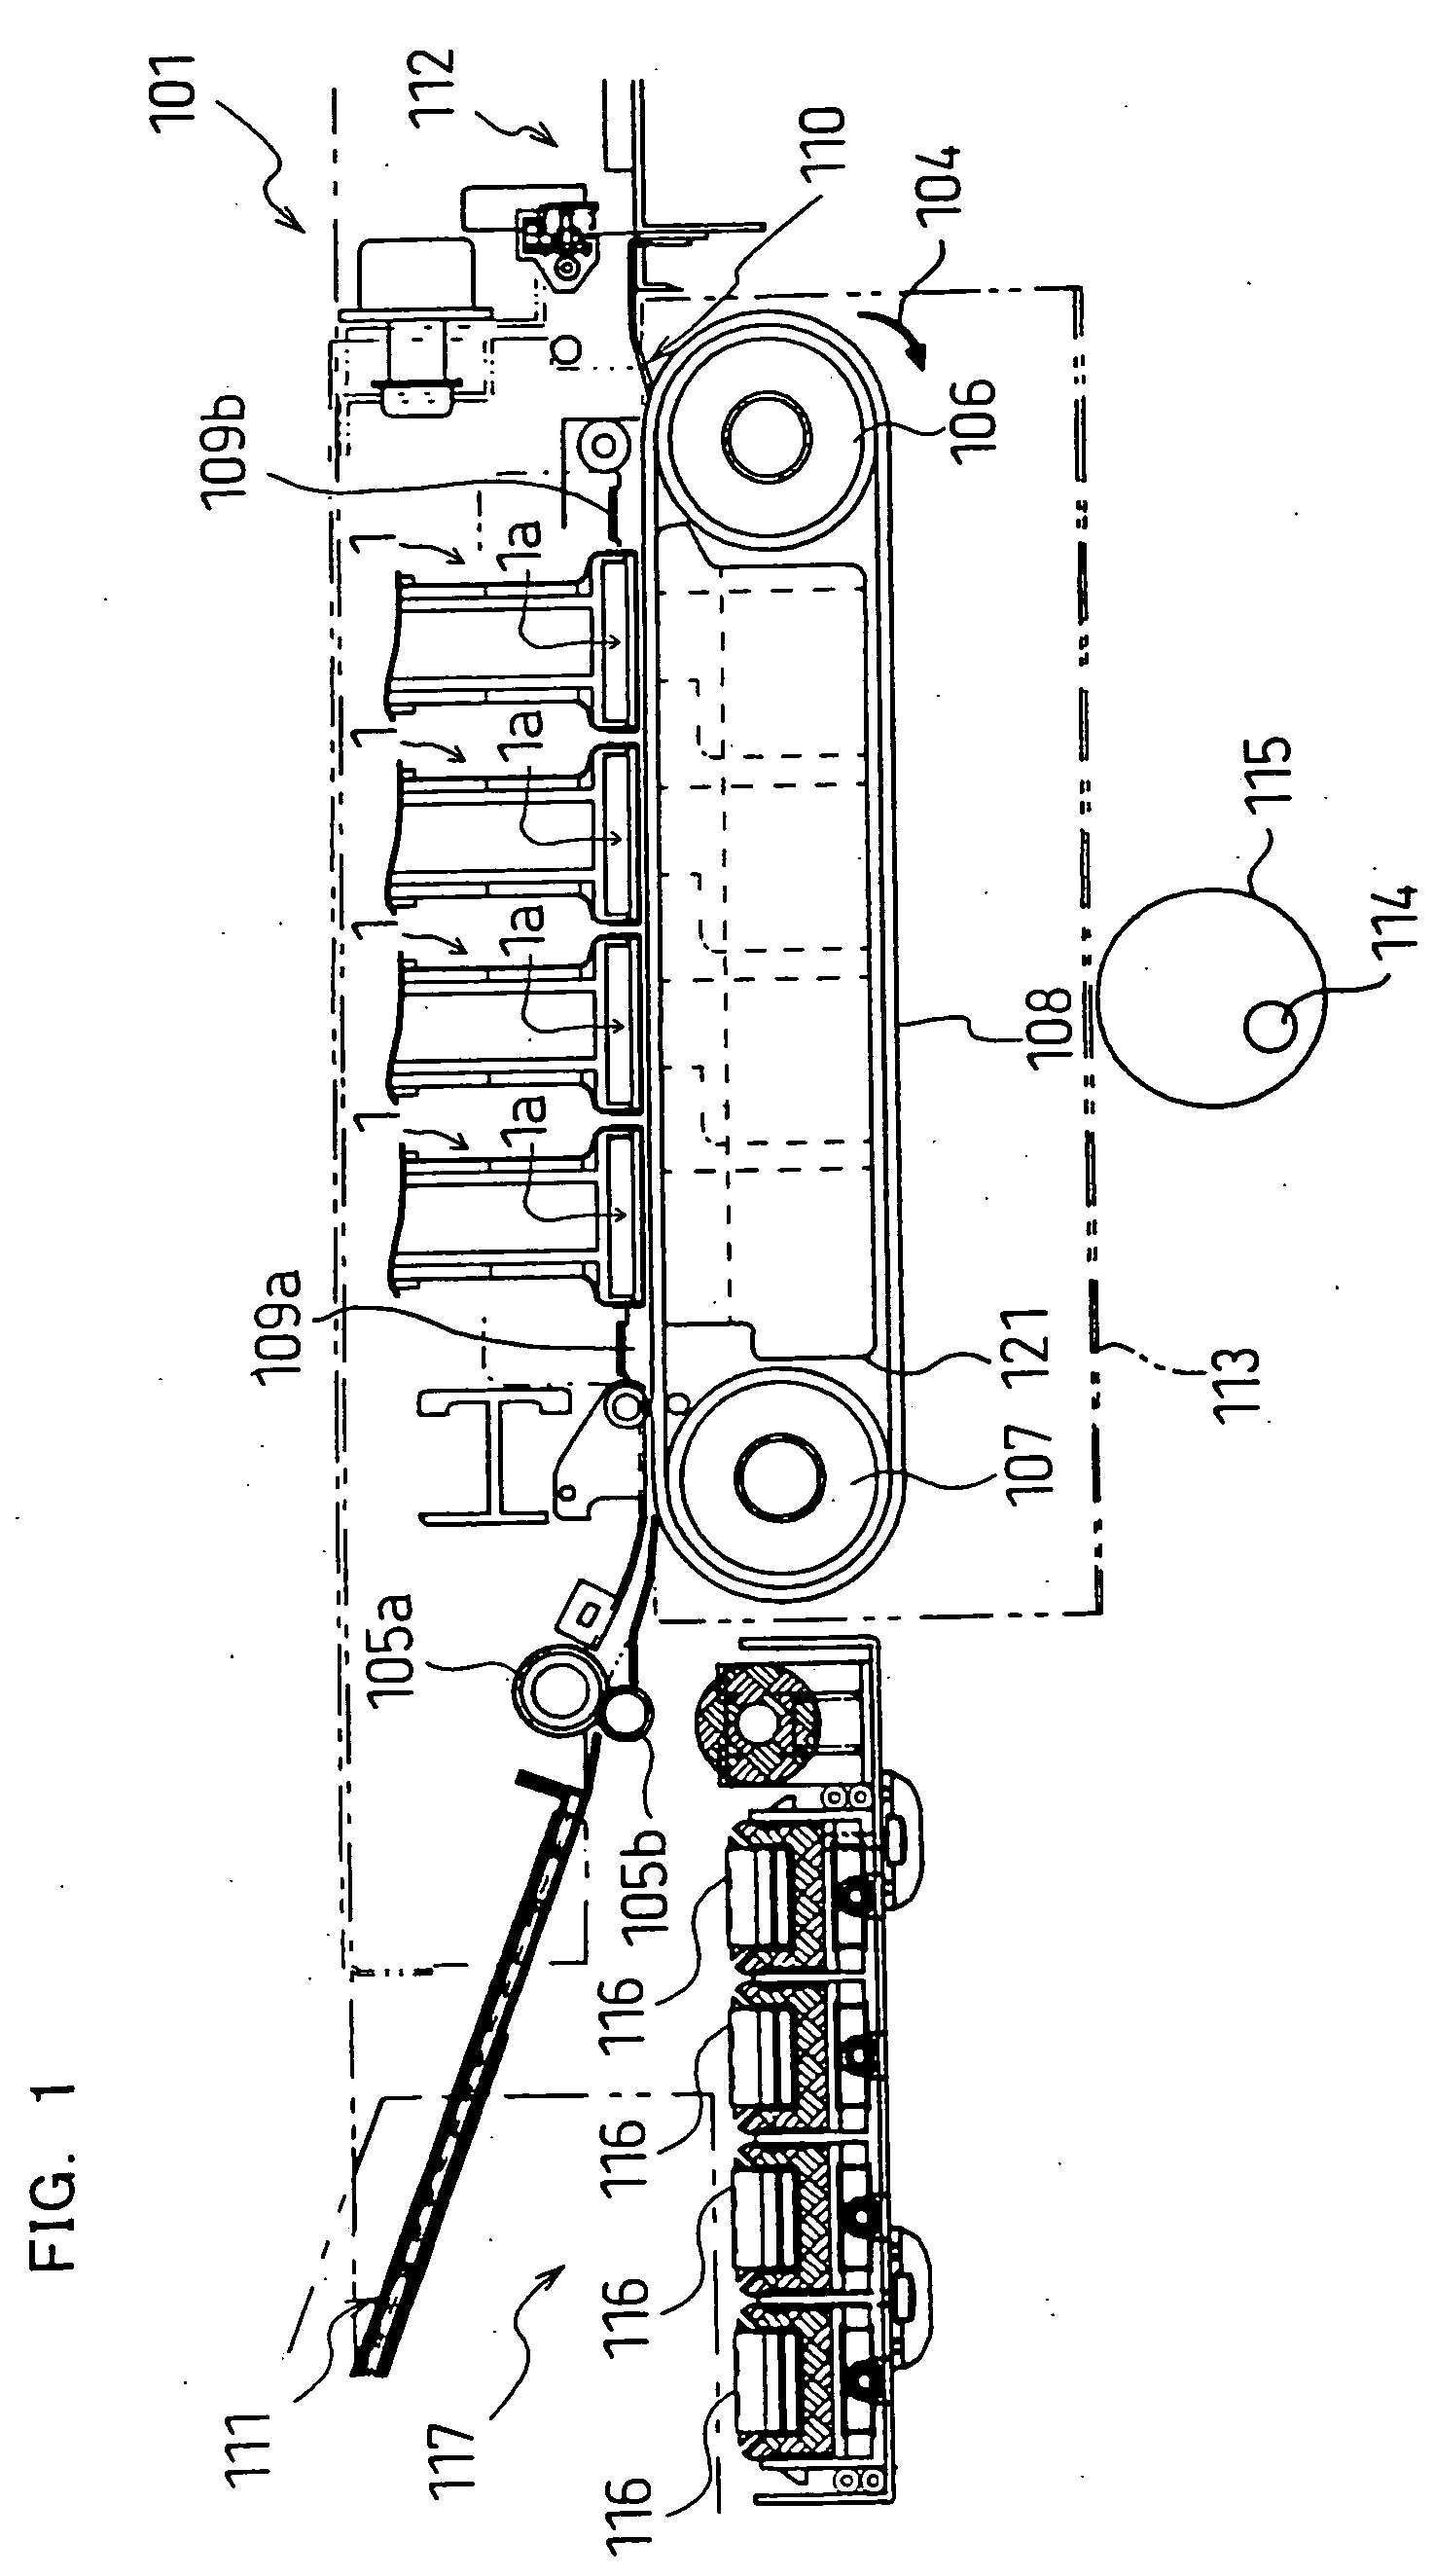 Ink-jet head having passage unit and actuator units attached to the passage unit, and ink-jet printer having the ink-jet head